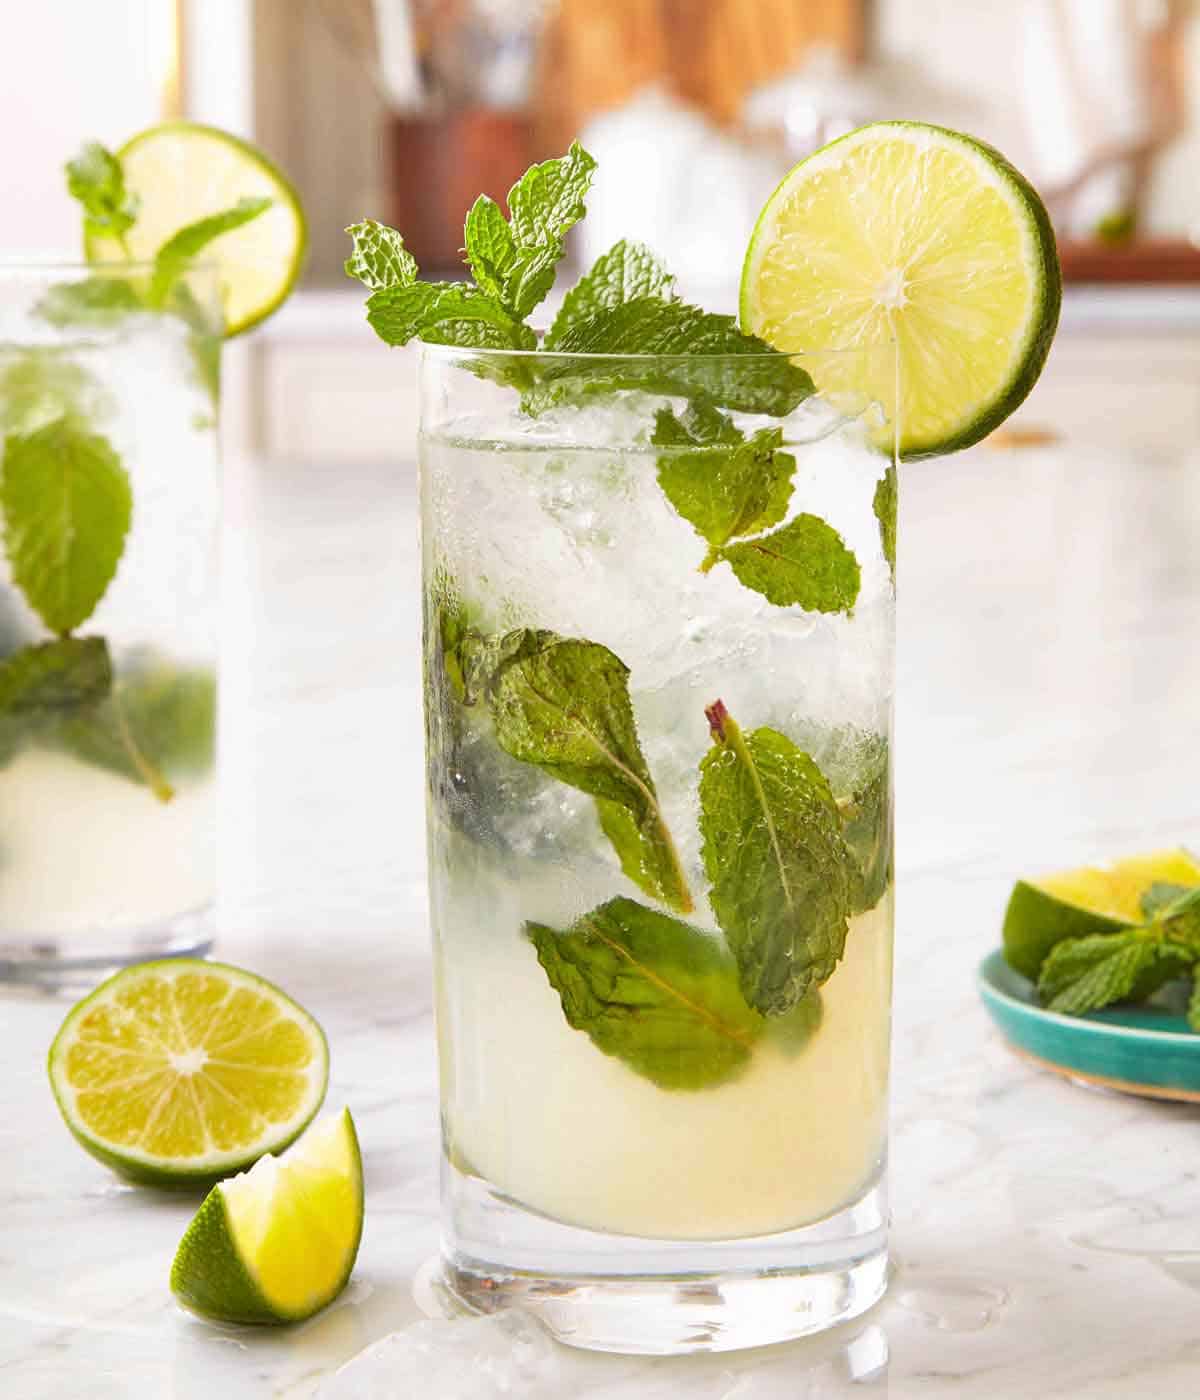 A glass of mojito with fresh lime and mint garnished on the glass and scattered around the counter.